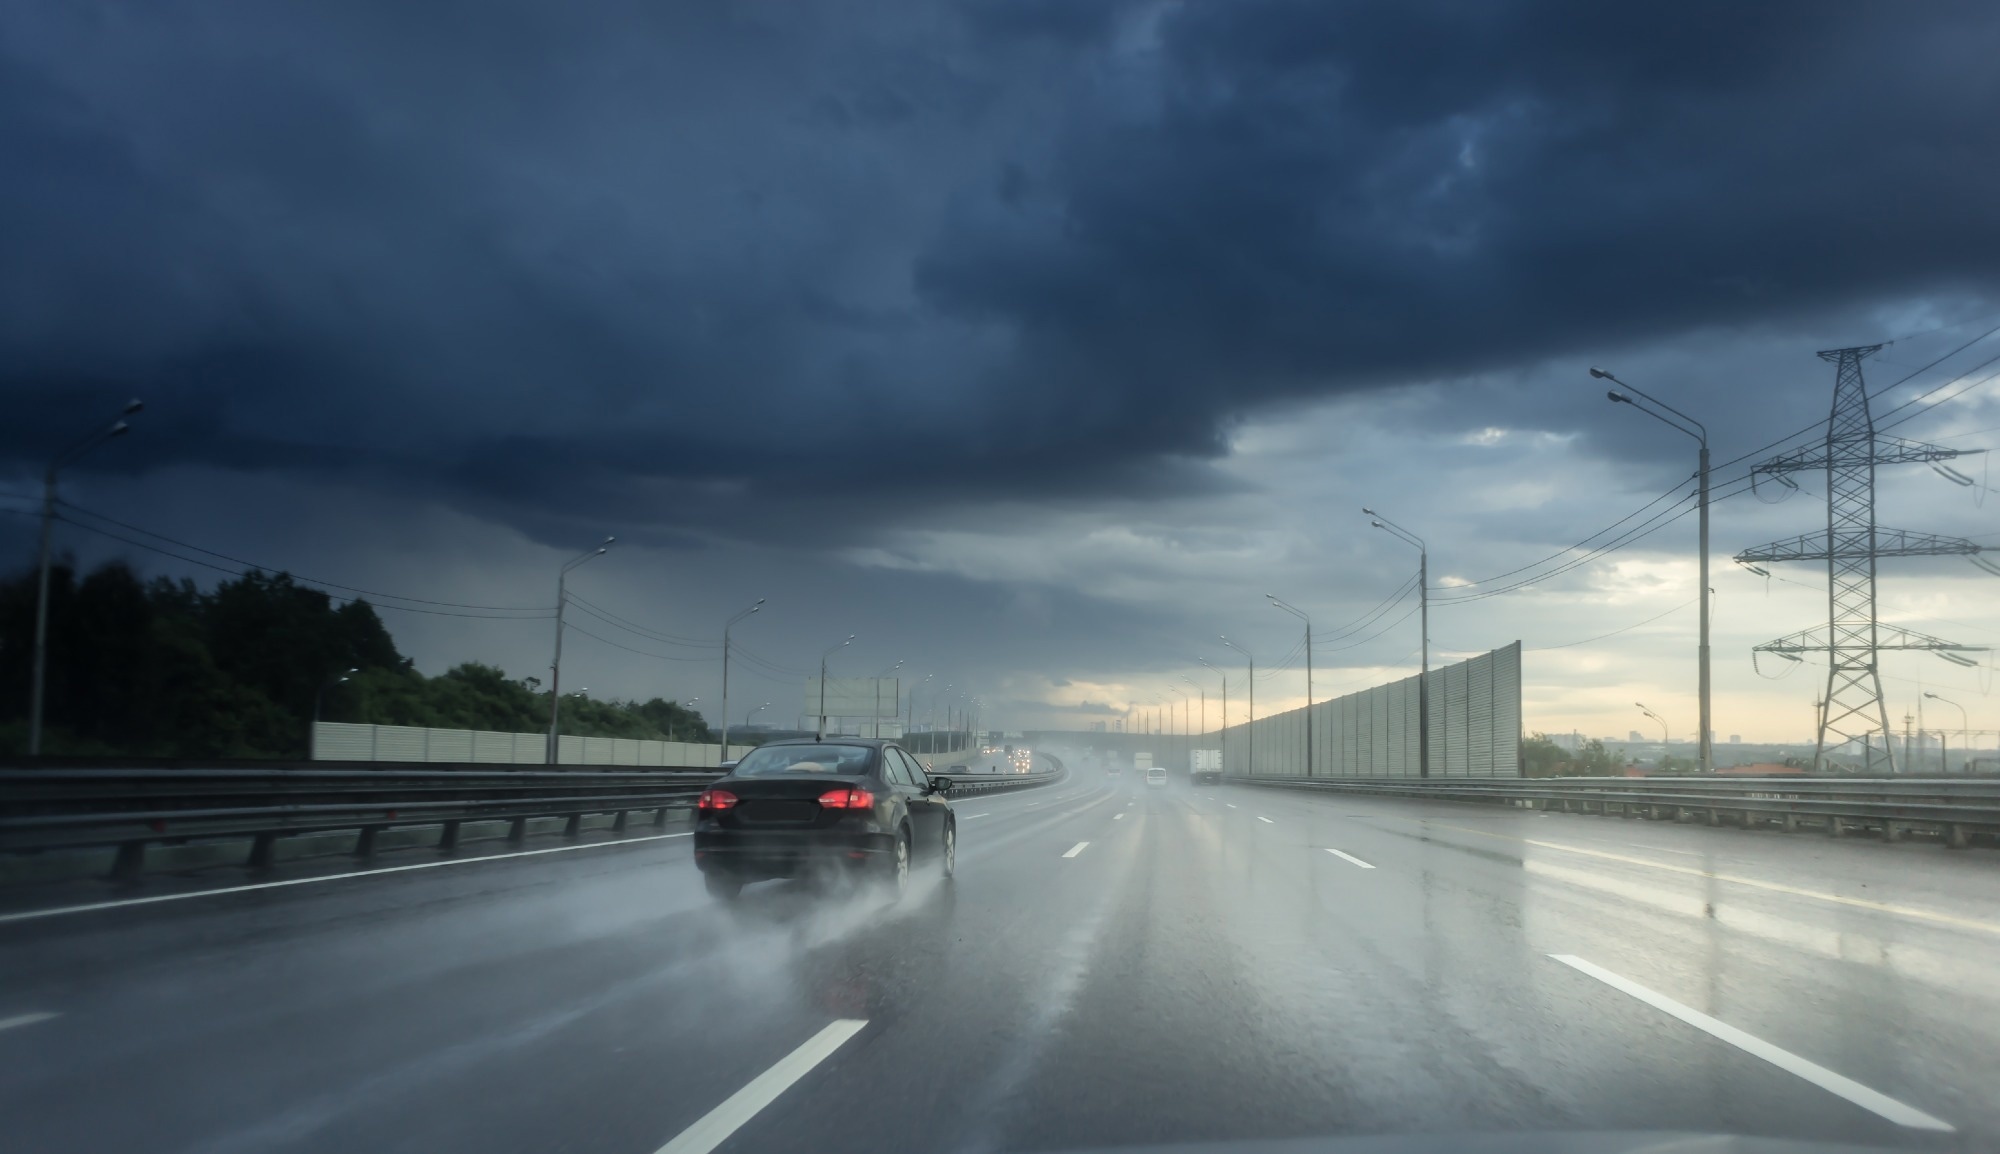 Study: Novel Algorithm for Accurate Weather Monitoring and Enhancing Highway Safety. Image credit: MakDill/Shutterstock